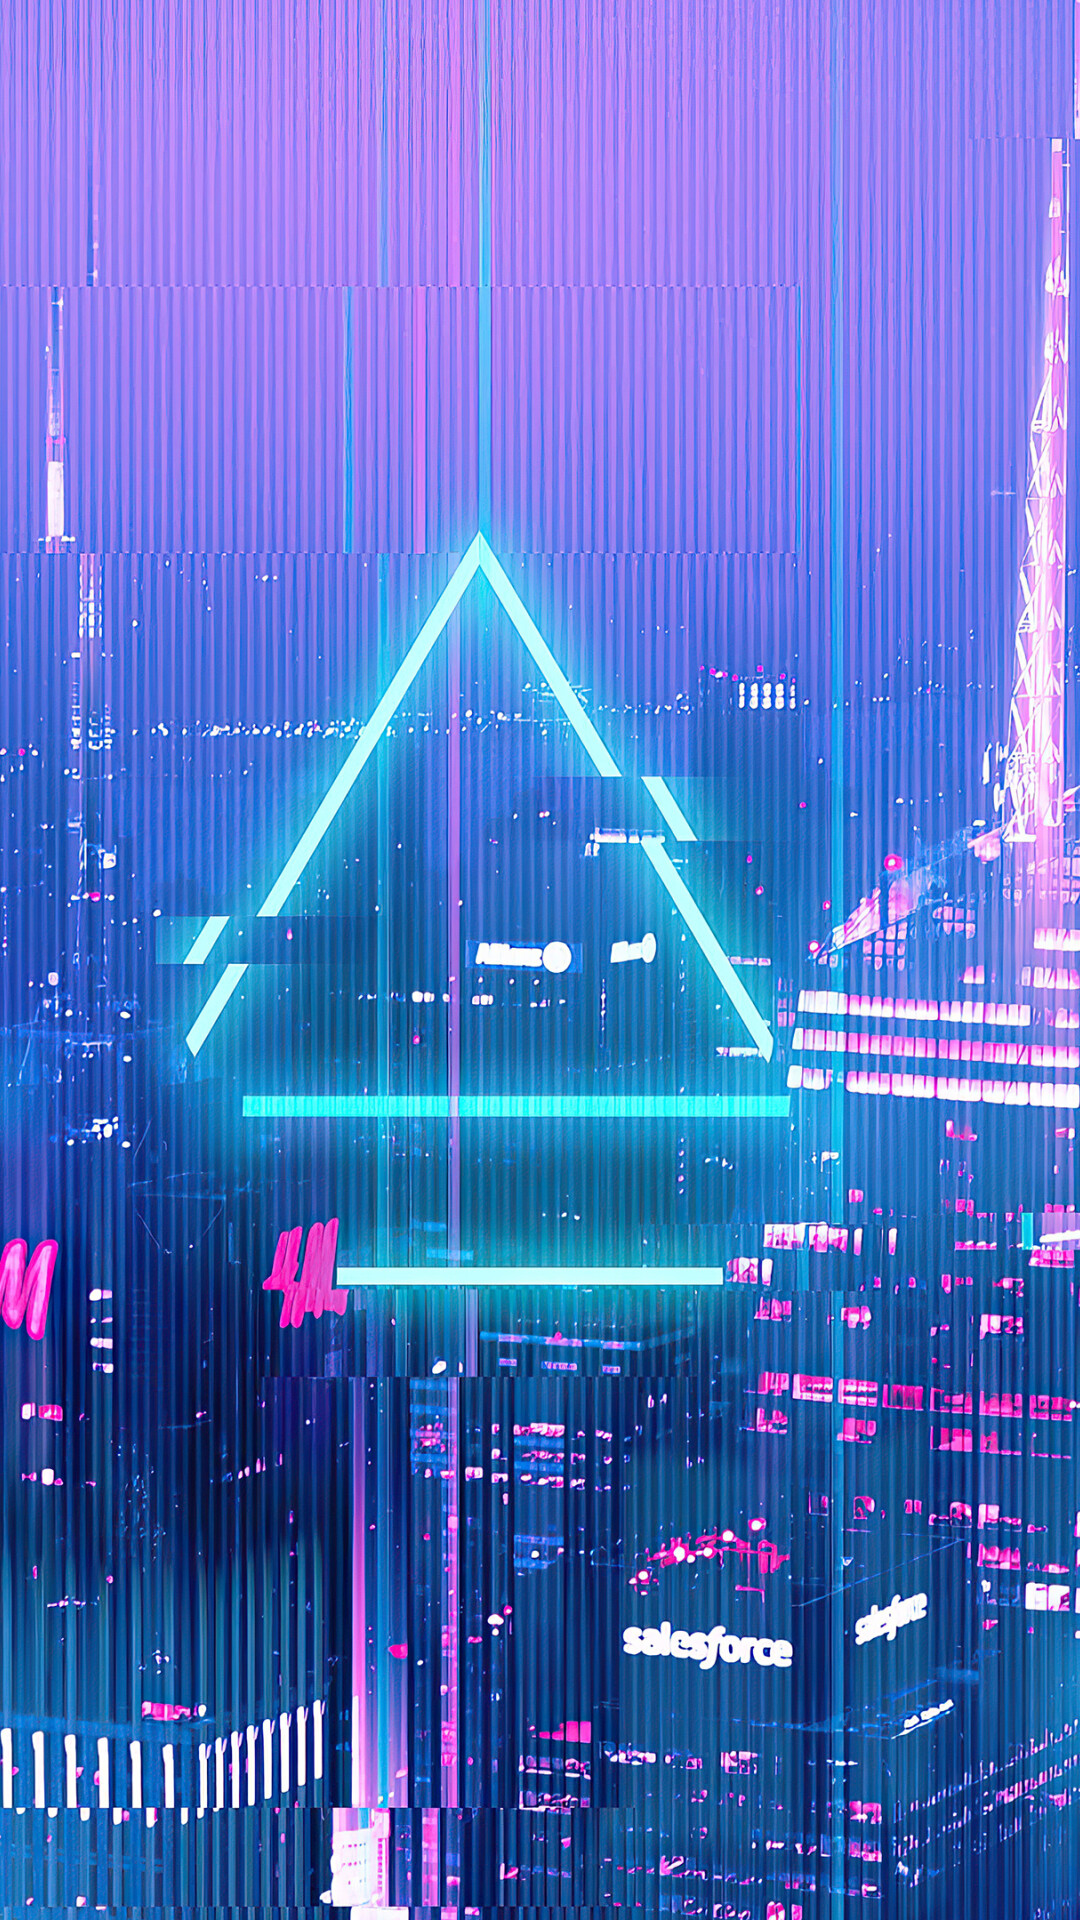 Glitch: An unexpected and minor digital problem, Equilateral triangle, Line segments. 1080x1920 Full HD Wallpaper.